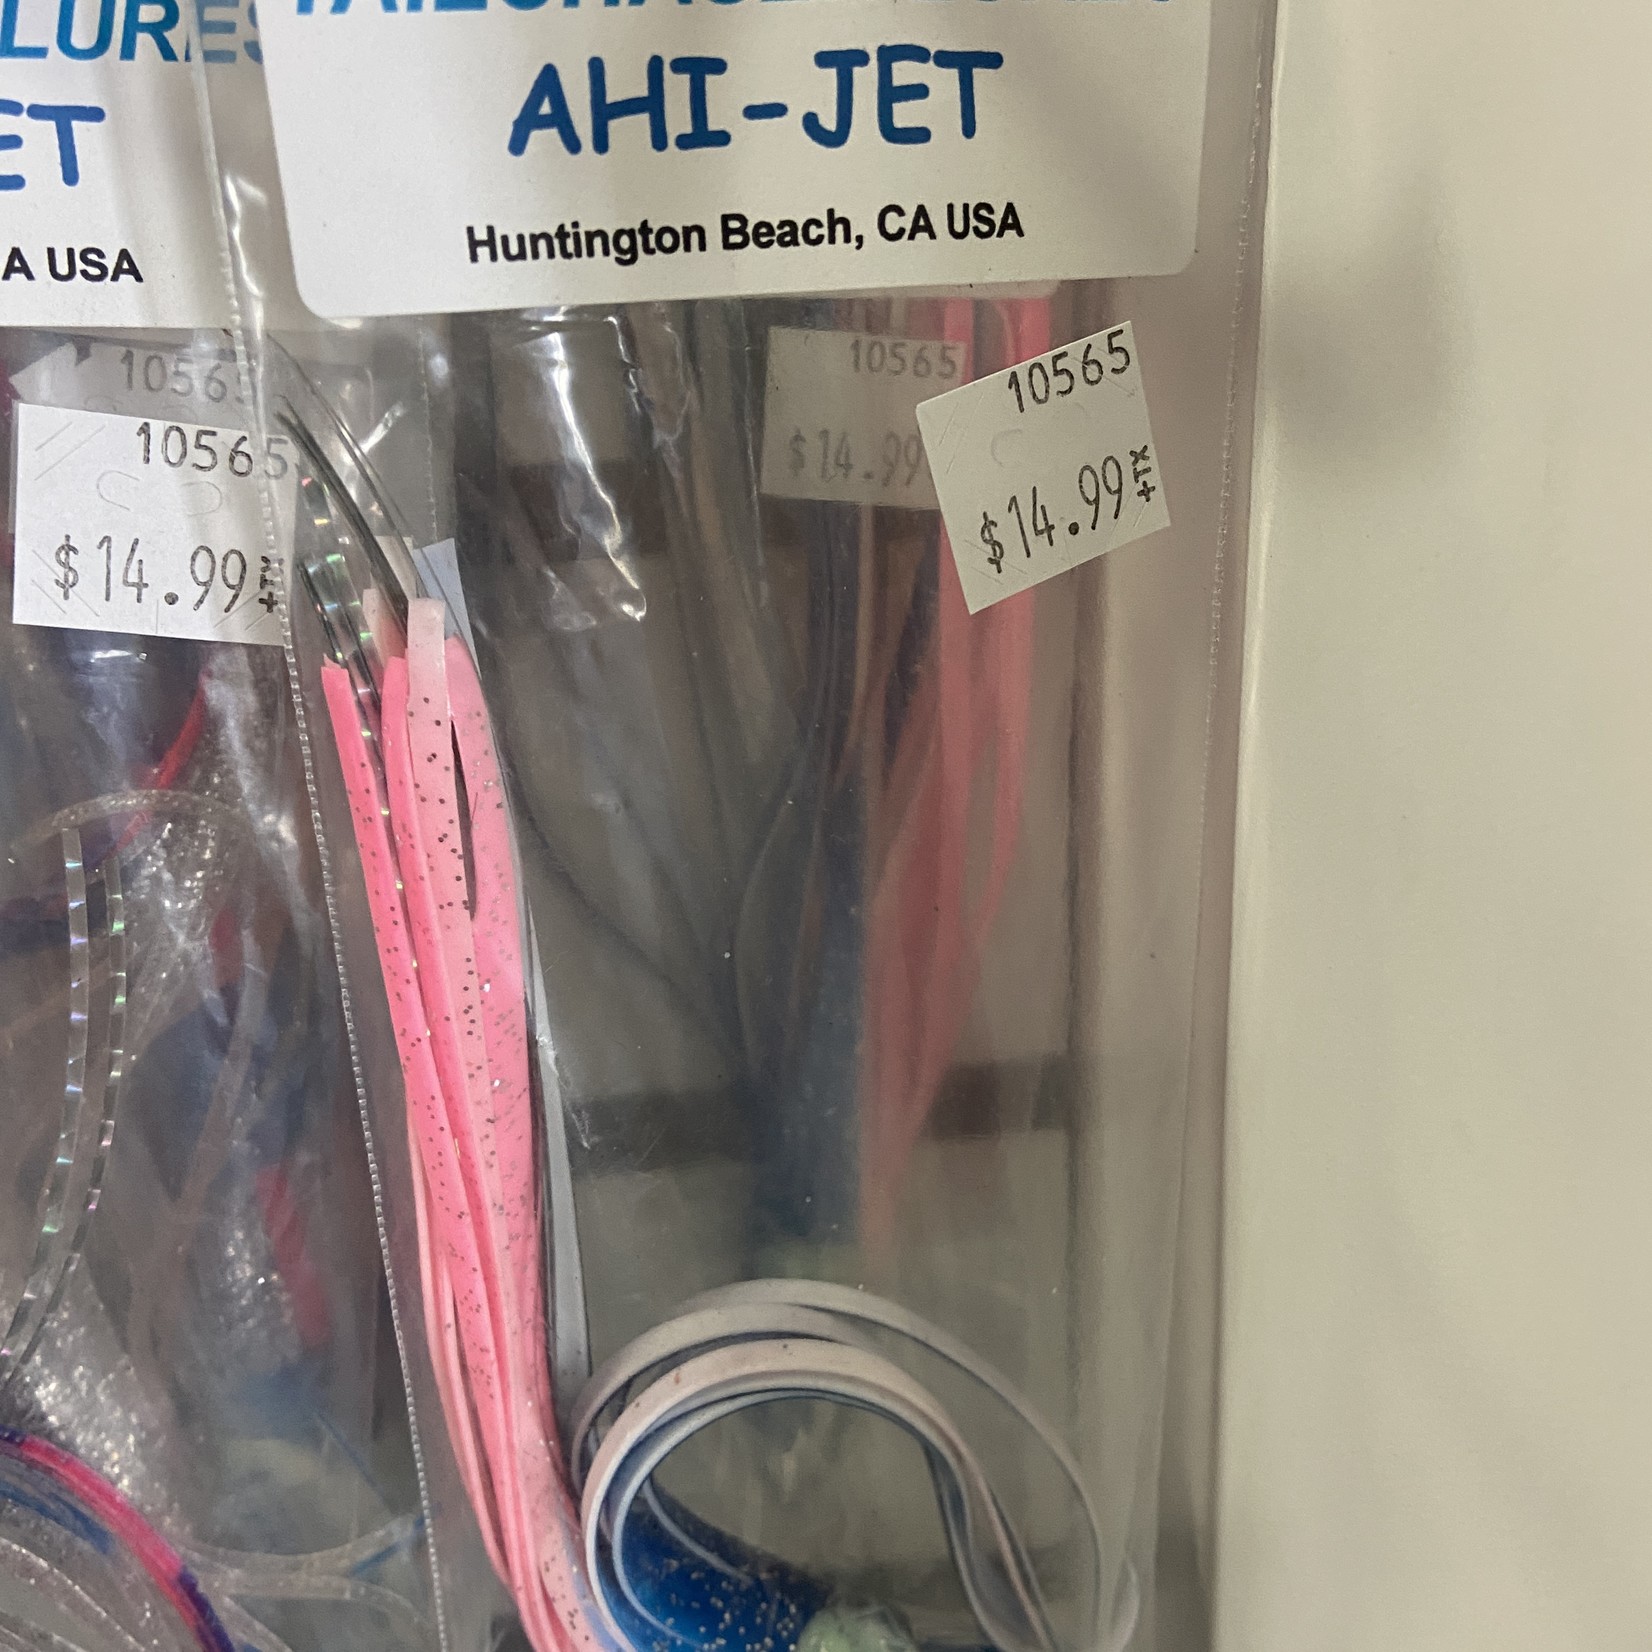 Tailchaser Lures - Ahi-Jet